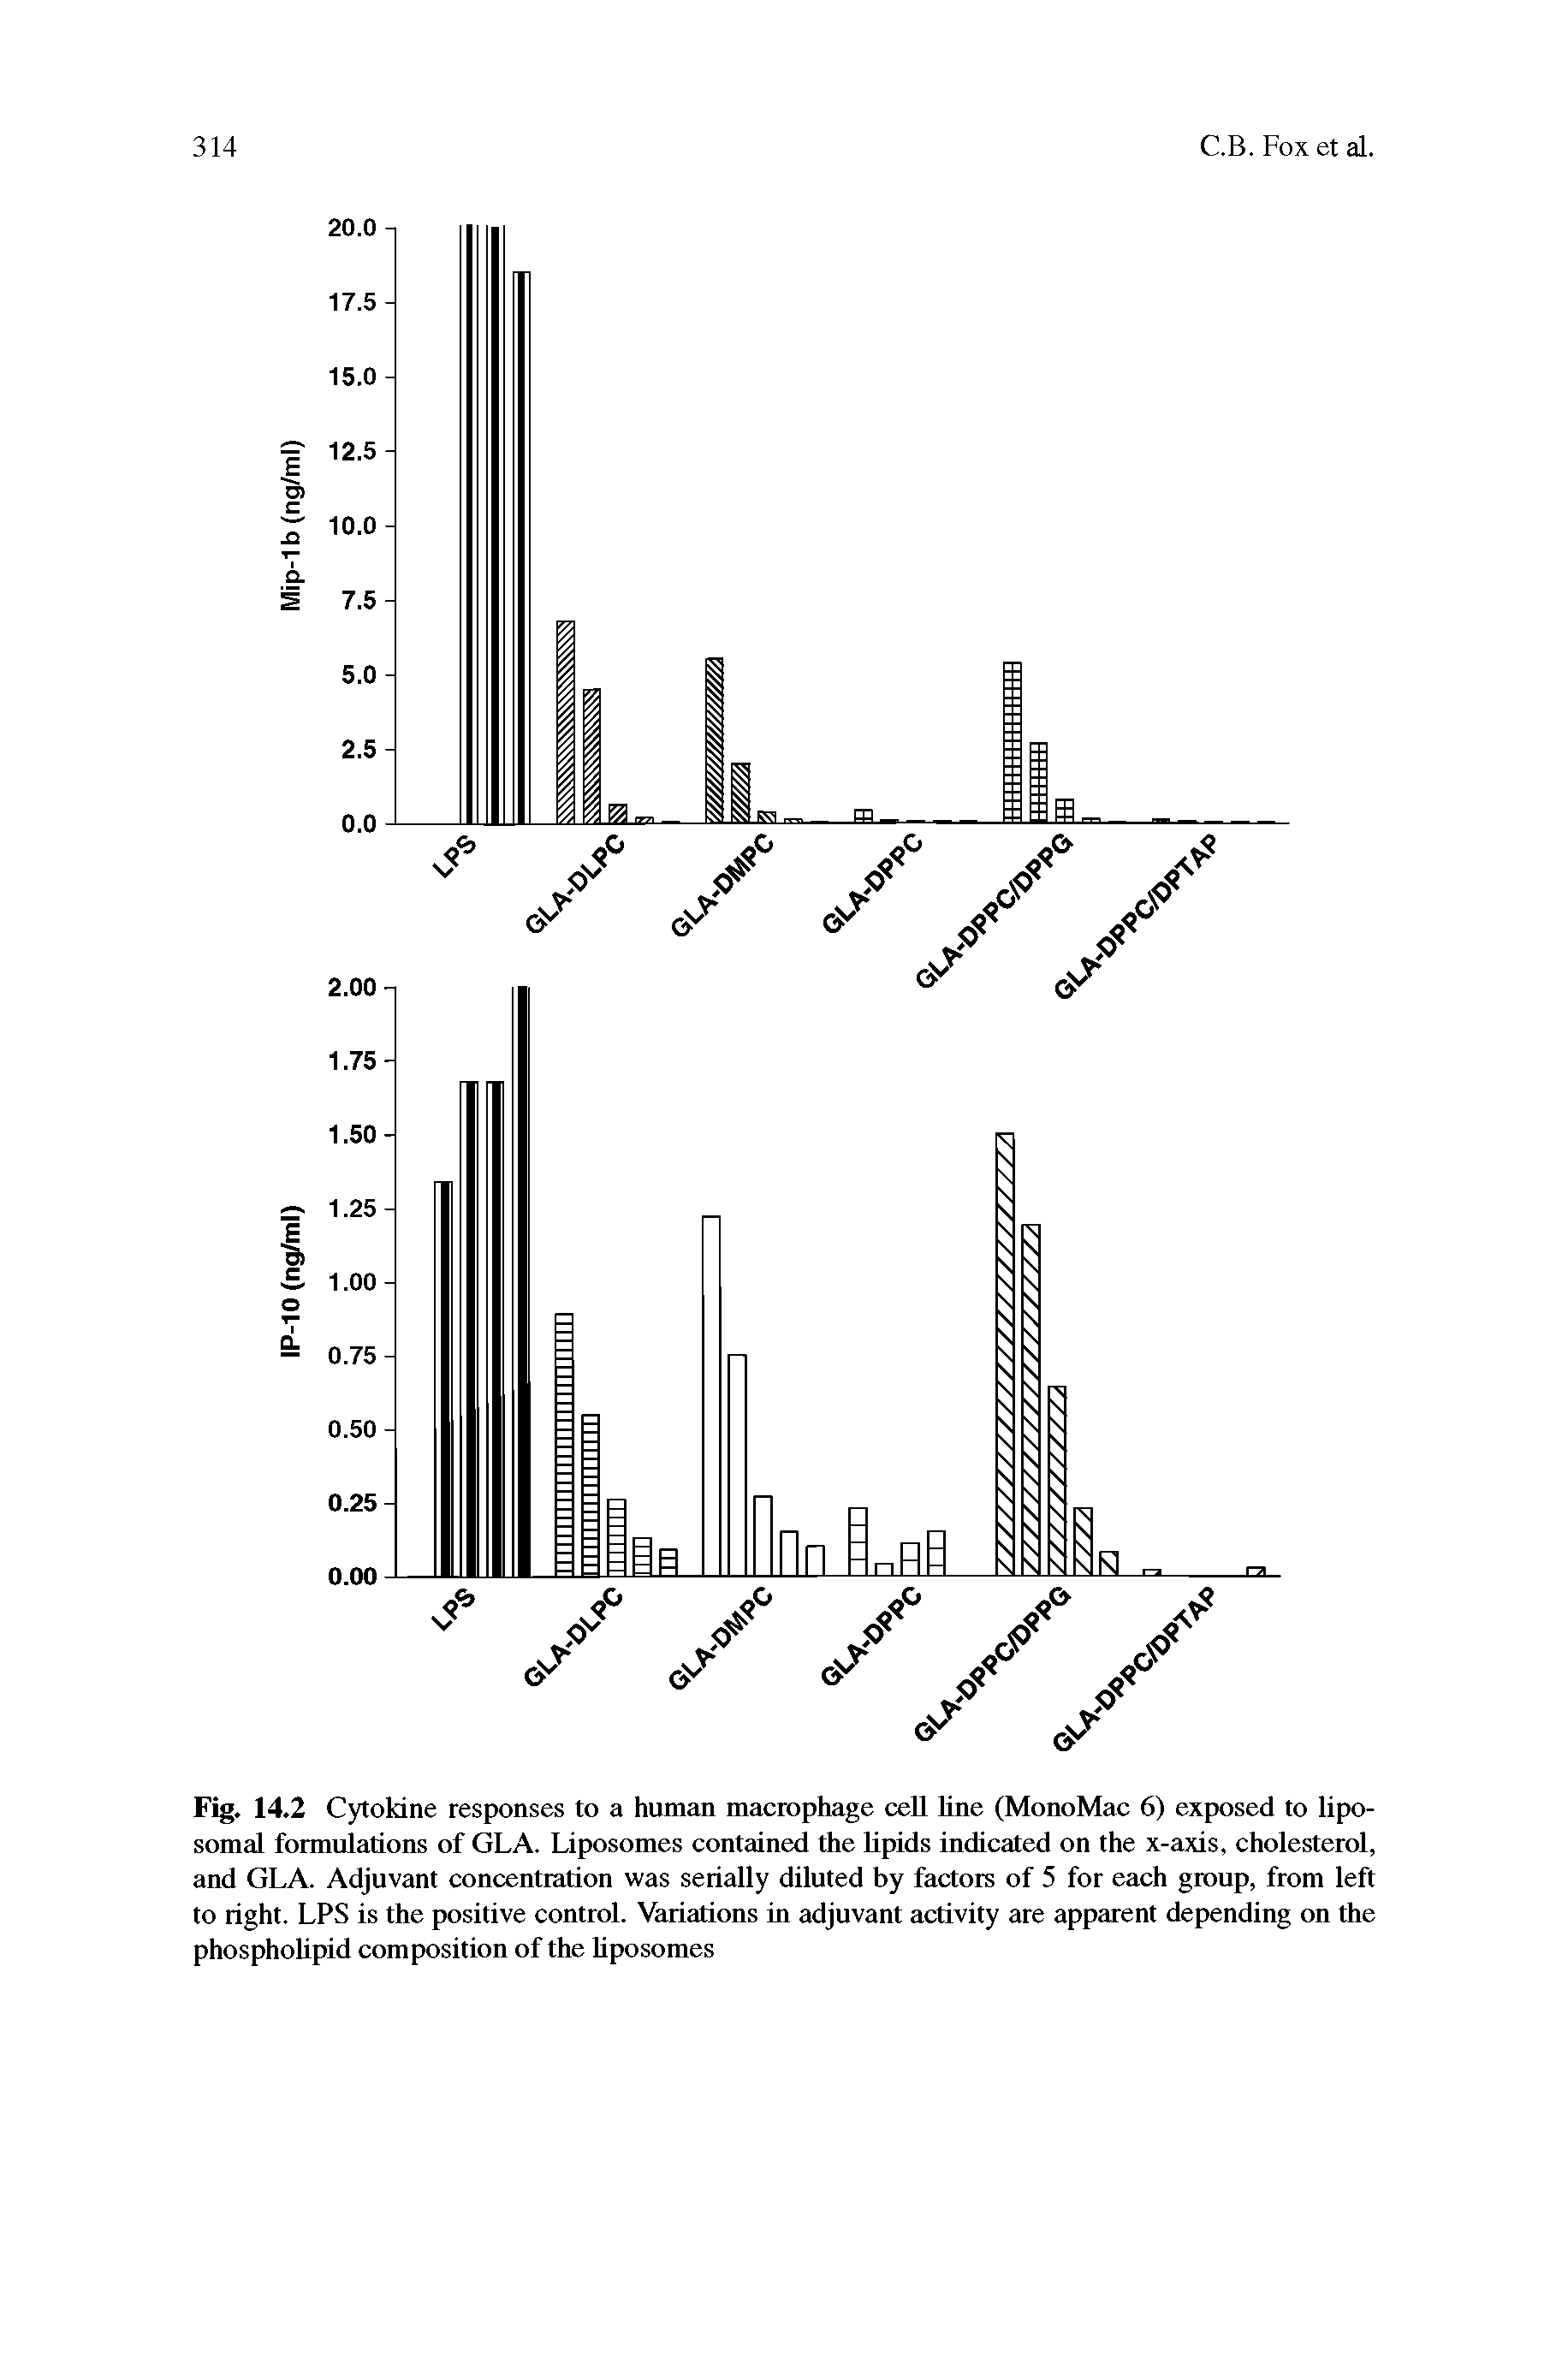 Fig. 14.2 Cytokine responses to a human macrophage cell line (MonoMac 6) exposed to liposomal formulations of GLA. Liposomes contained the lipids indicated on the x-axis, cholesterol, and GLA. Adjuvant concentration was serially diluted by factors of 5 for each group, from left to right. LPS is the positive control. Variations in adjuvant activity are apparent depending on the phospholipid composition of the liposomes...